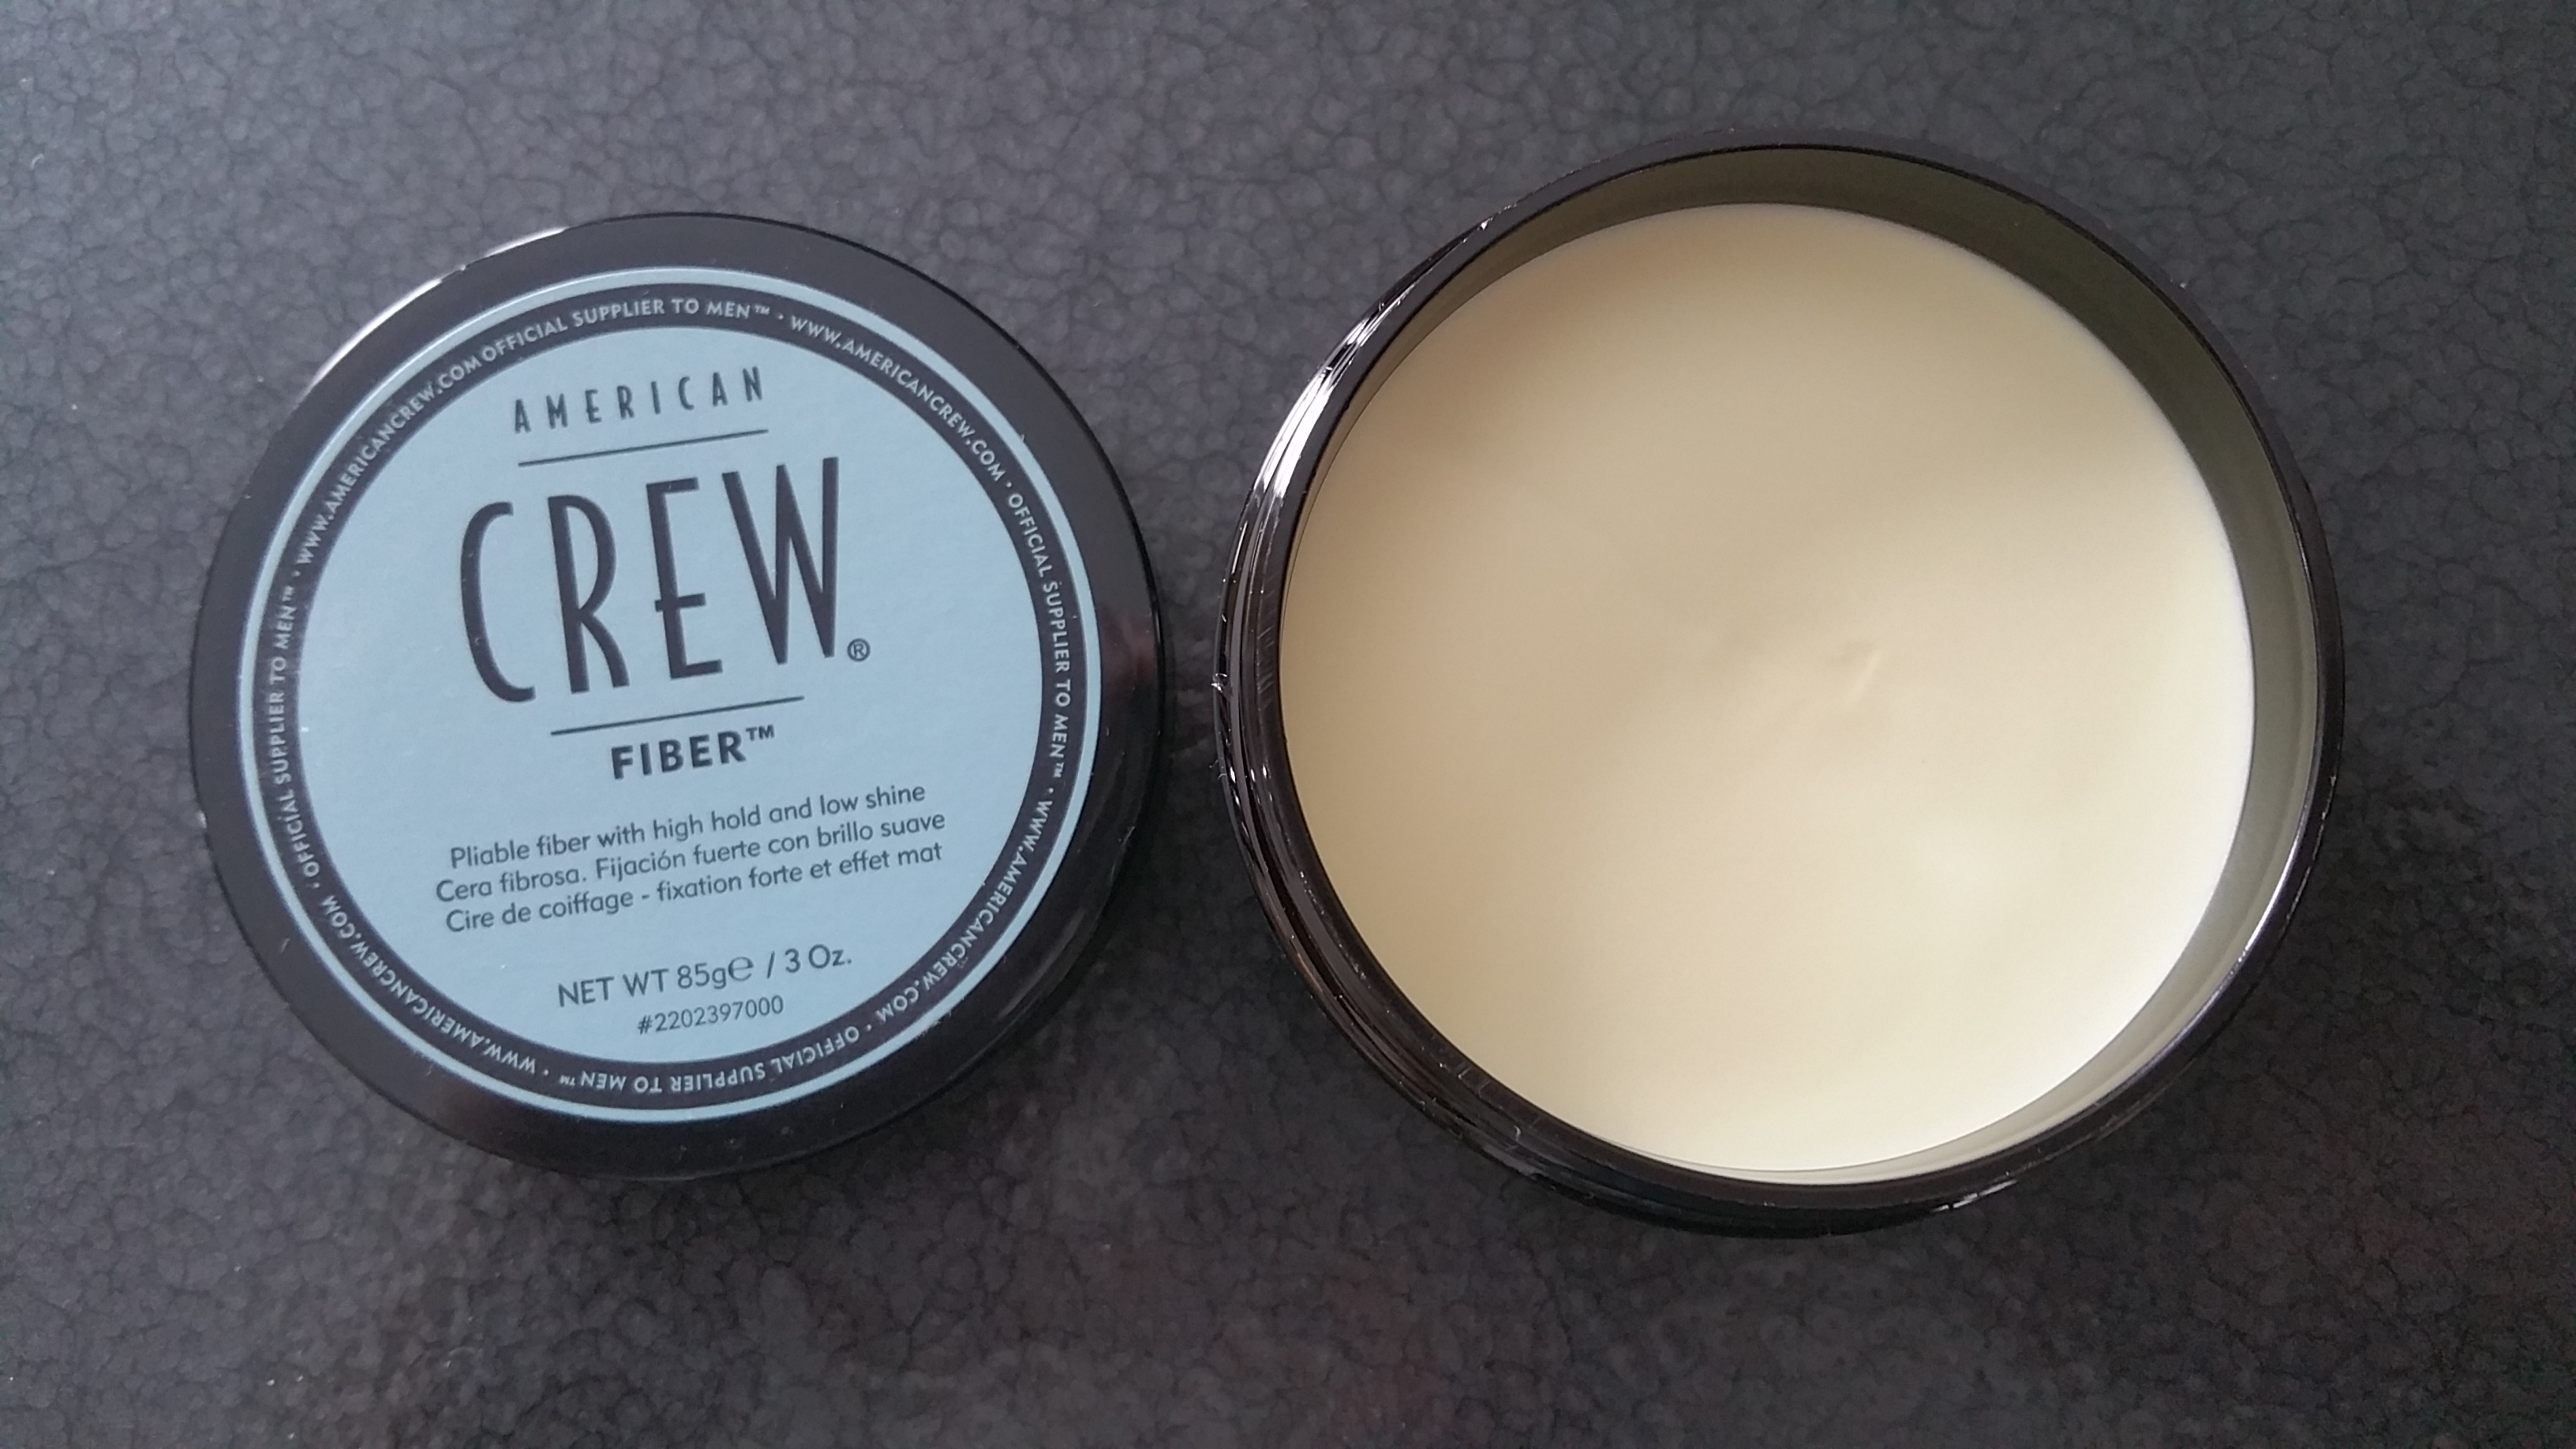 American Crew – Power Cleanser and Fiber duo